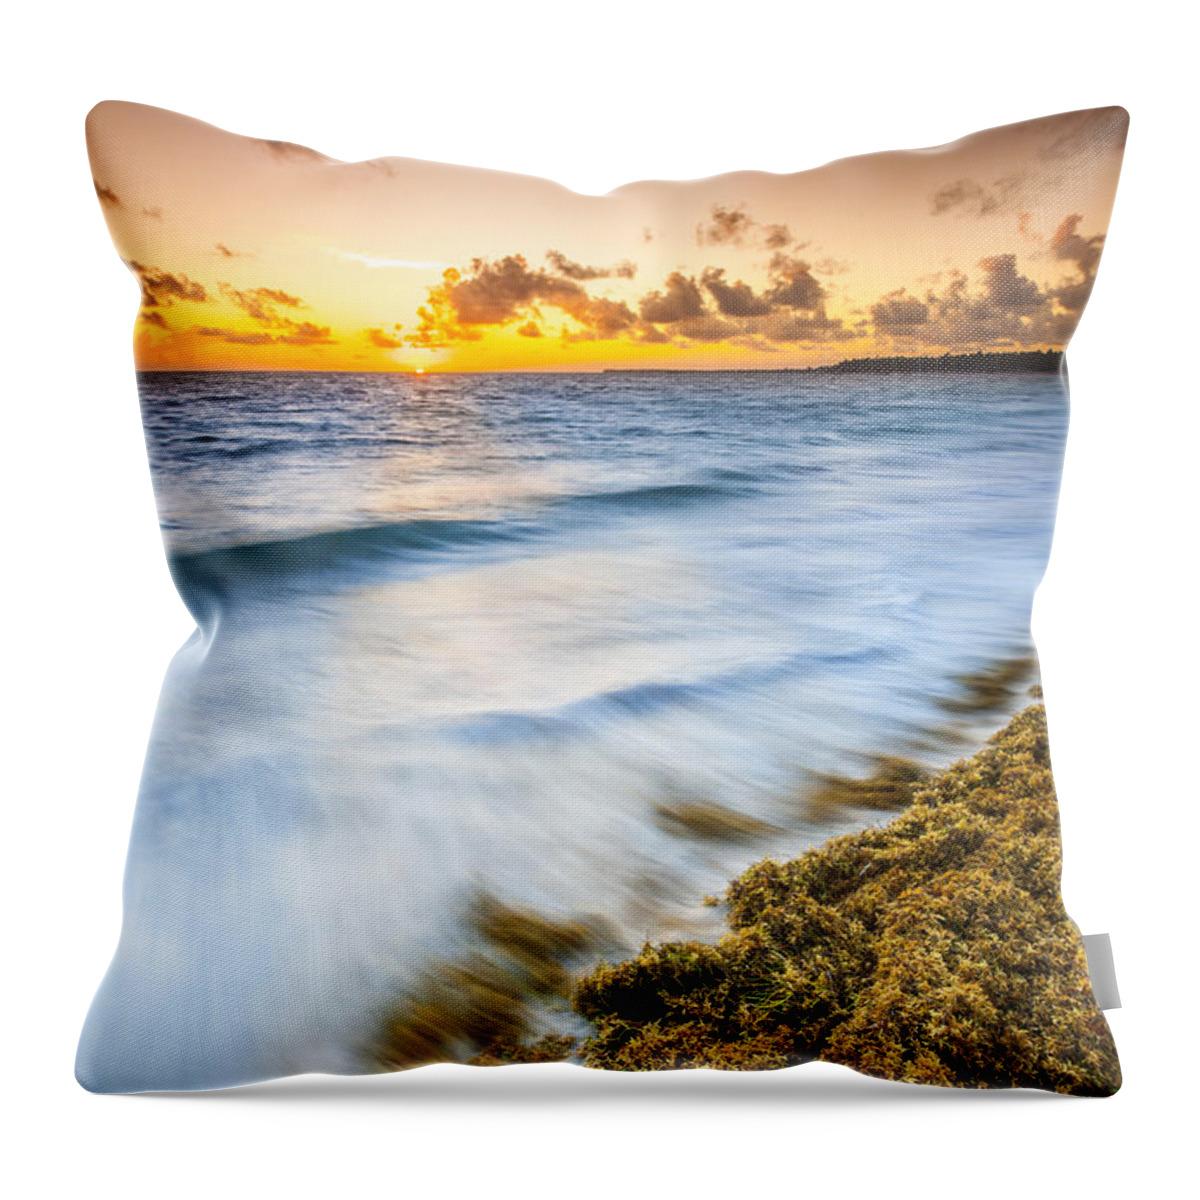 Clouds Throw Pillow featuring the photograph Ocean Retreat by Sebastian Musial